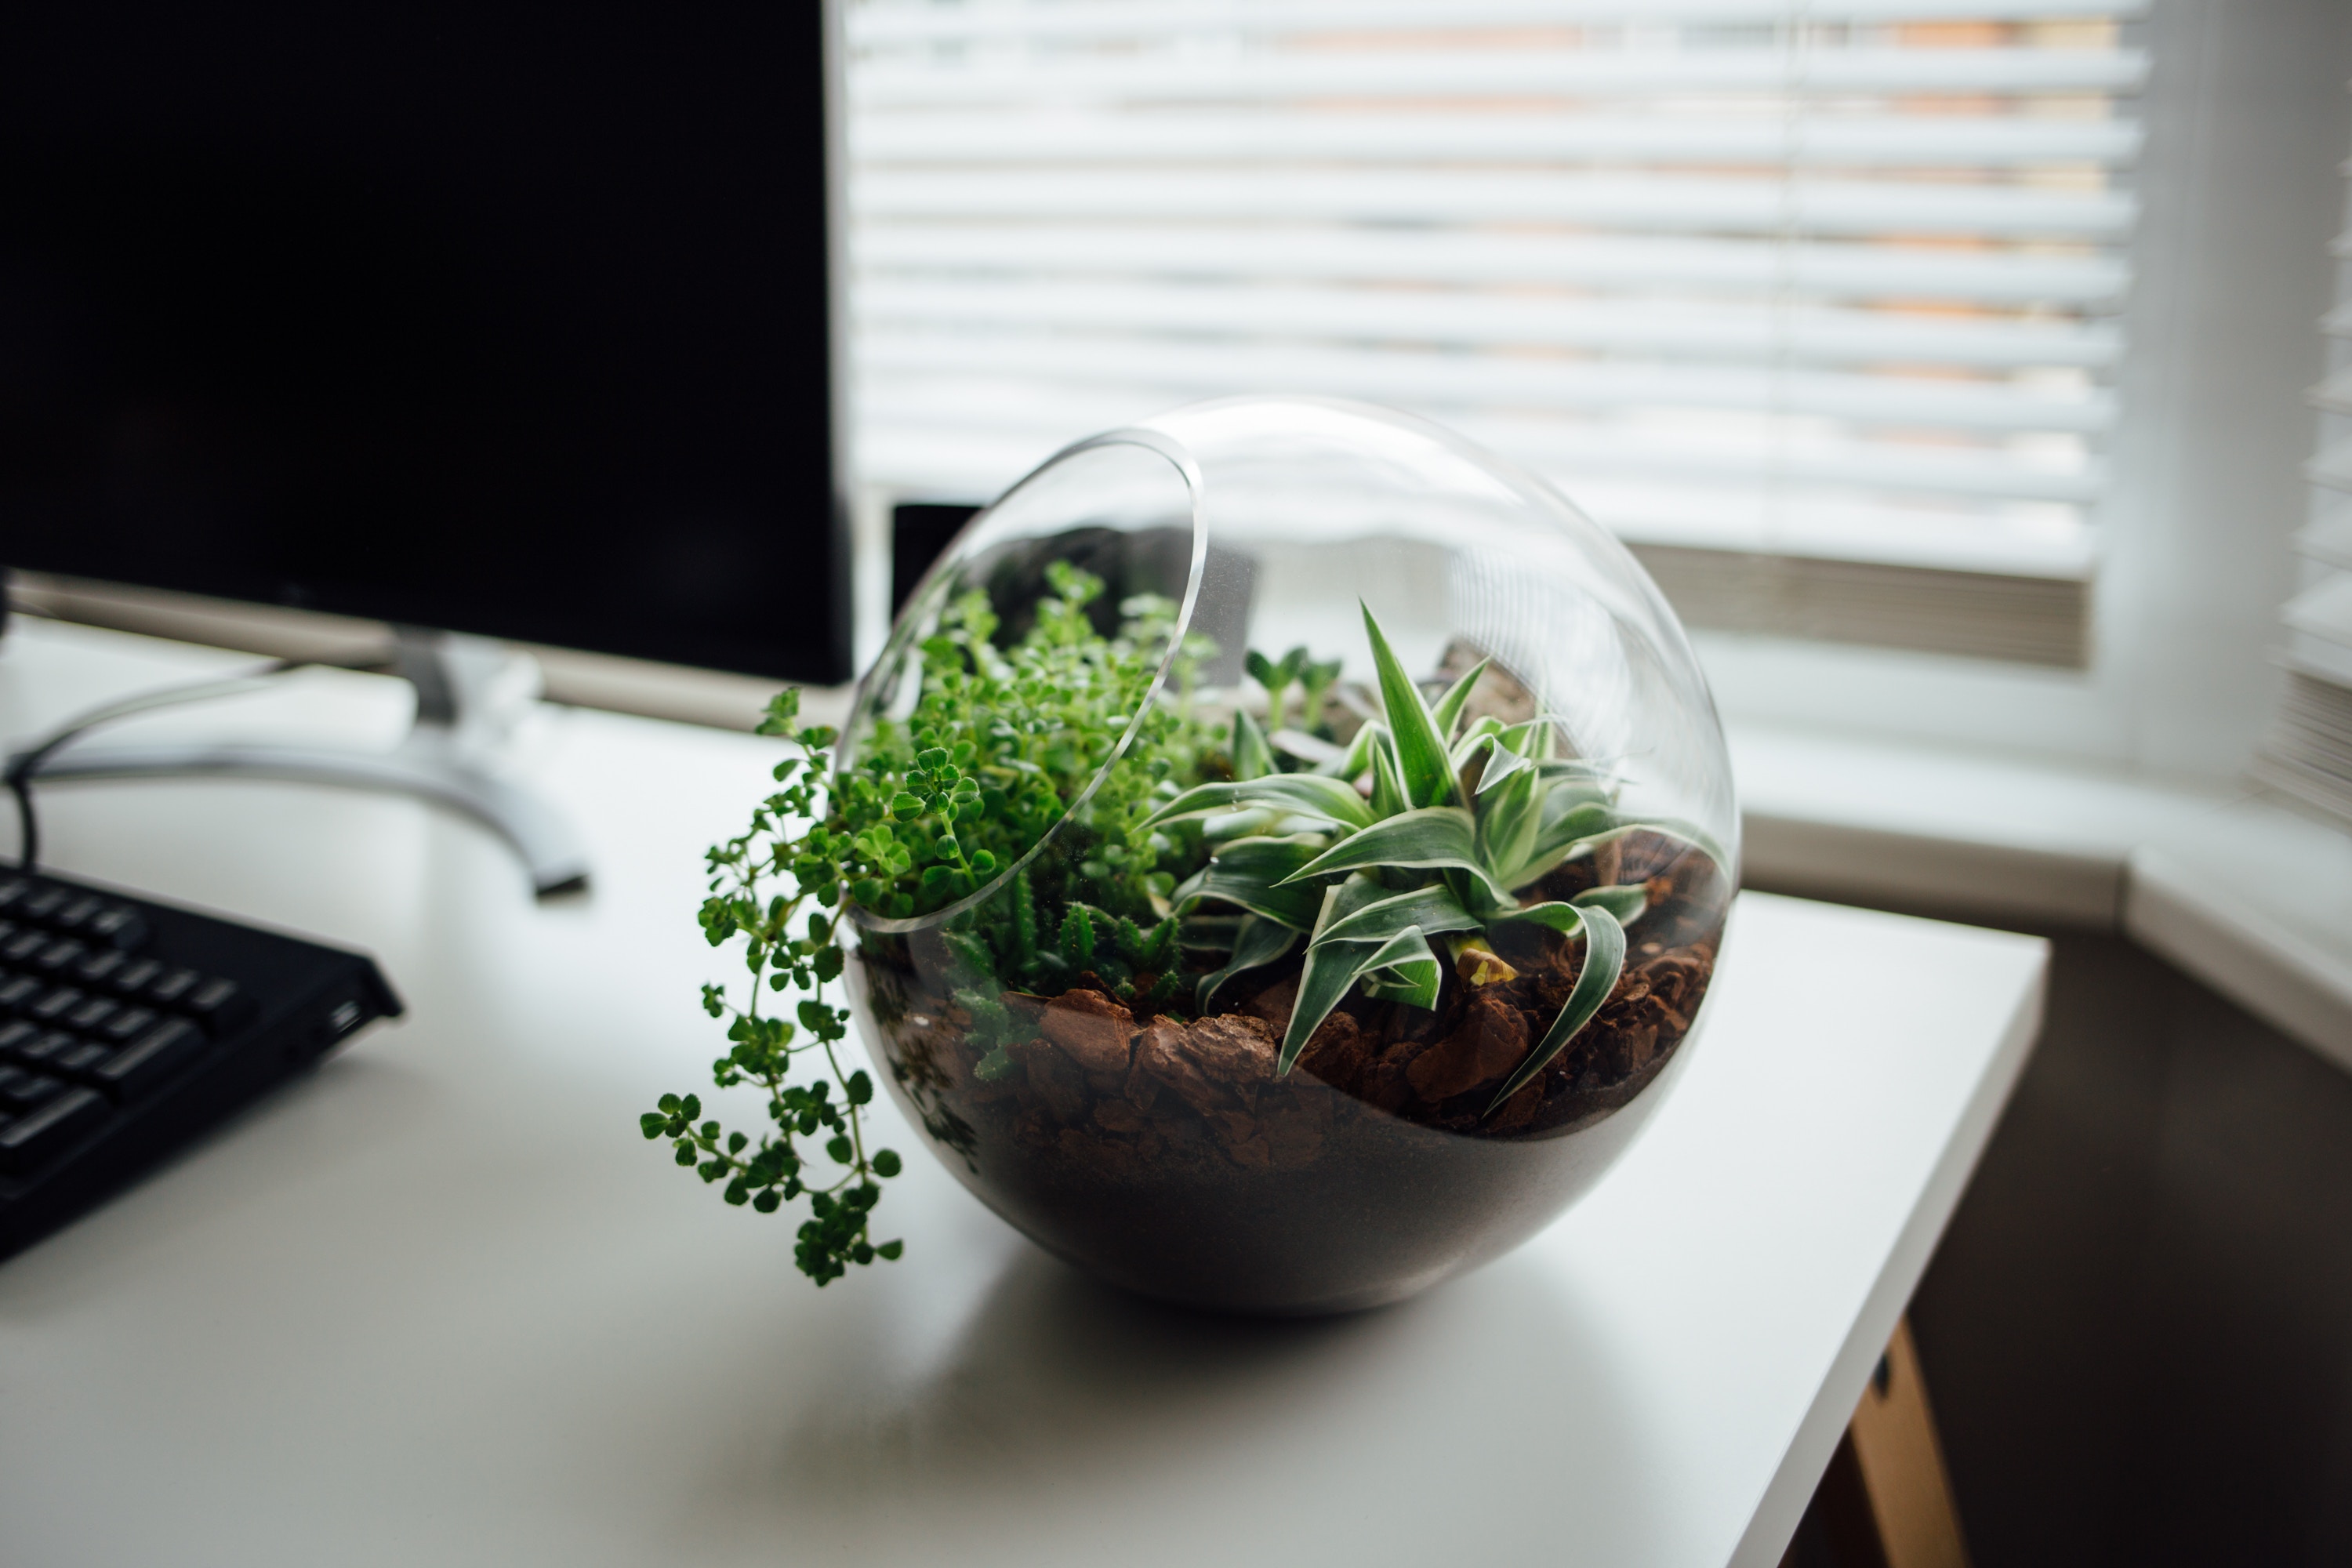 The Absolute Beginners’ Guide to Making Your Own Terrarium